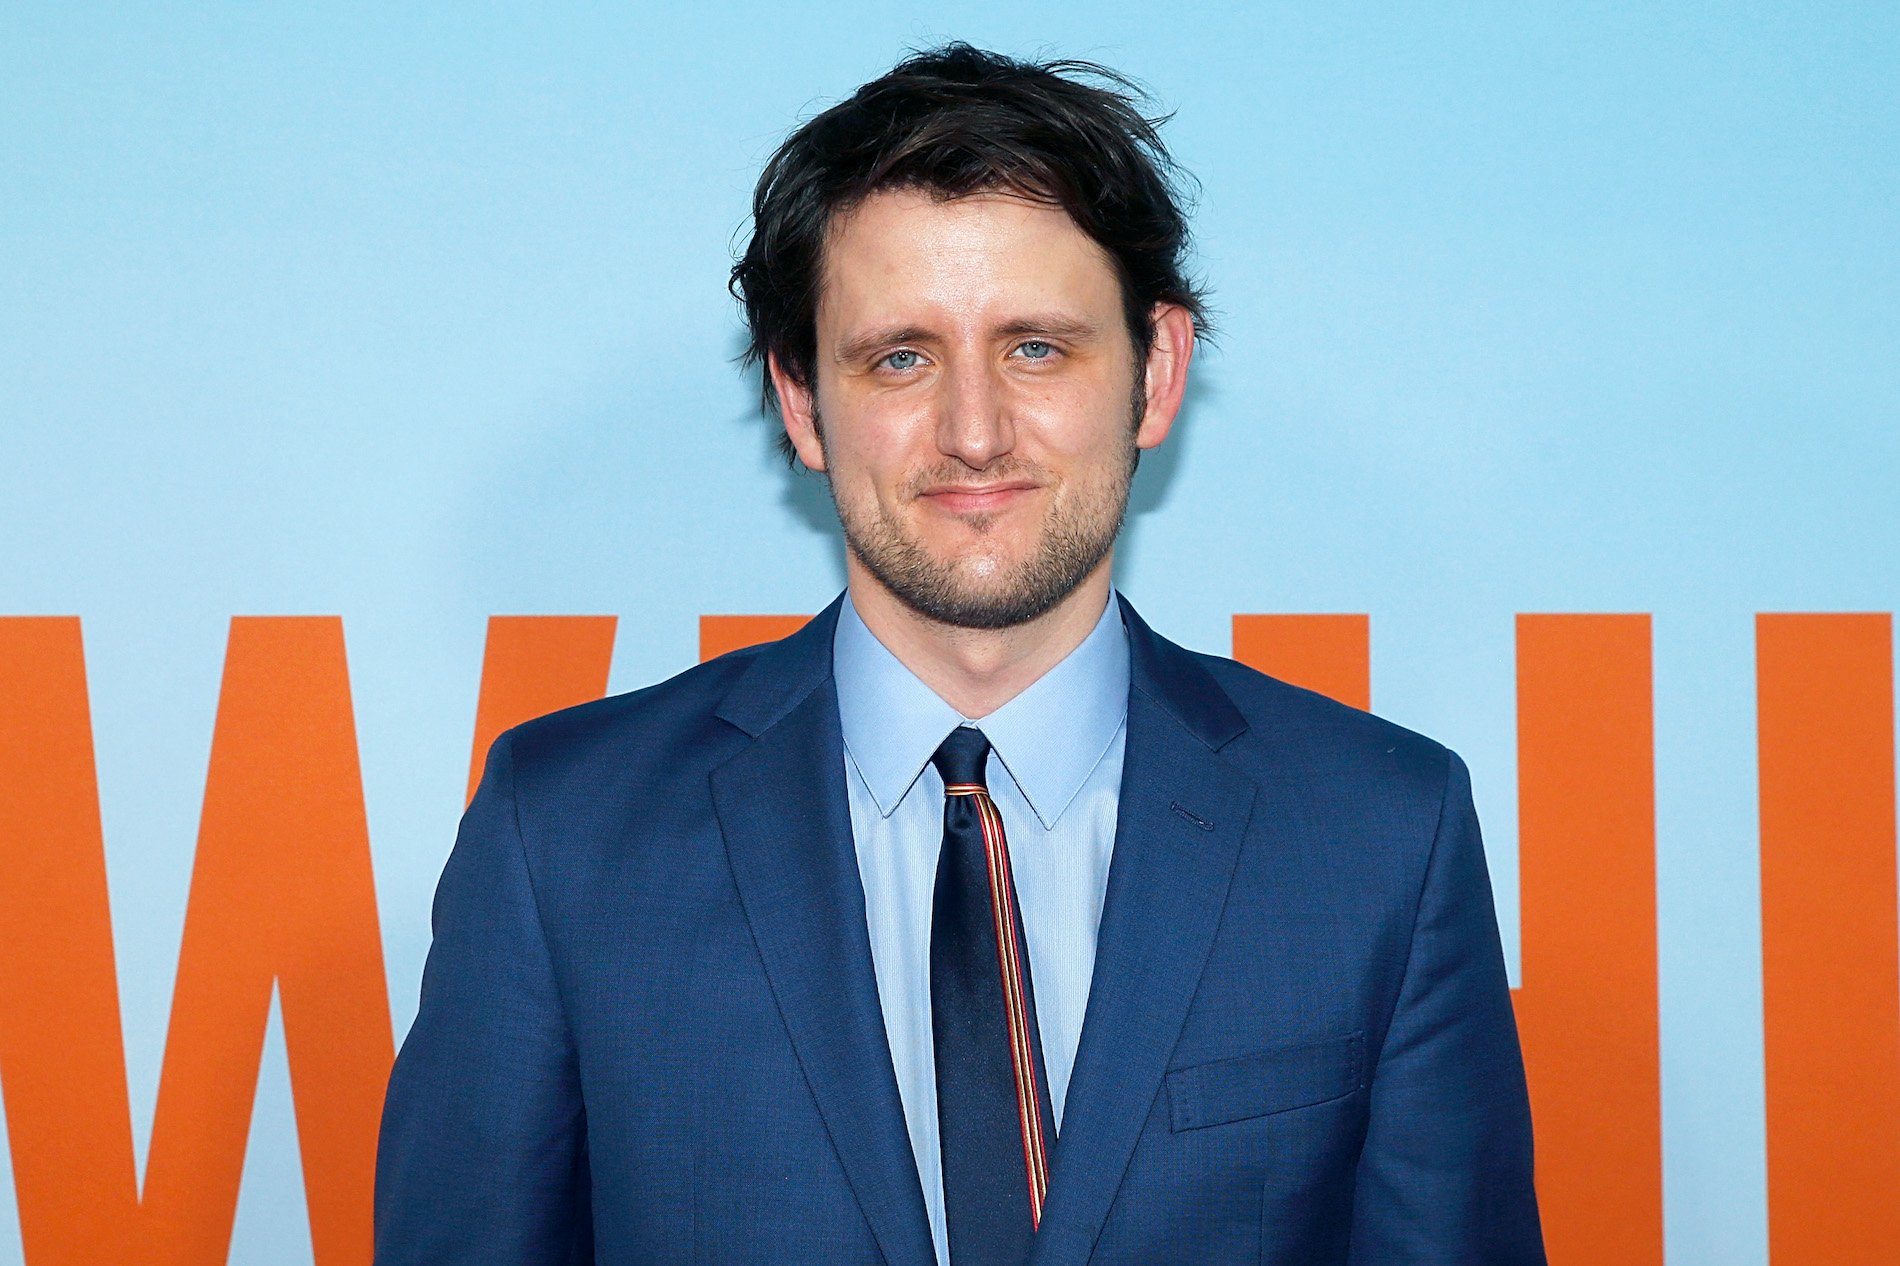 Zach Woods, who had a feud with Drake, posing for a photo.